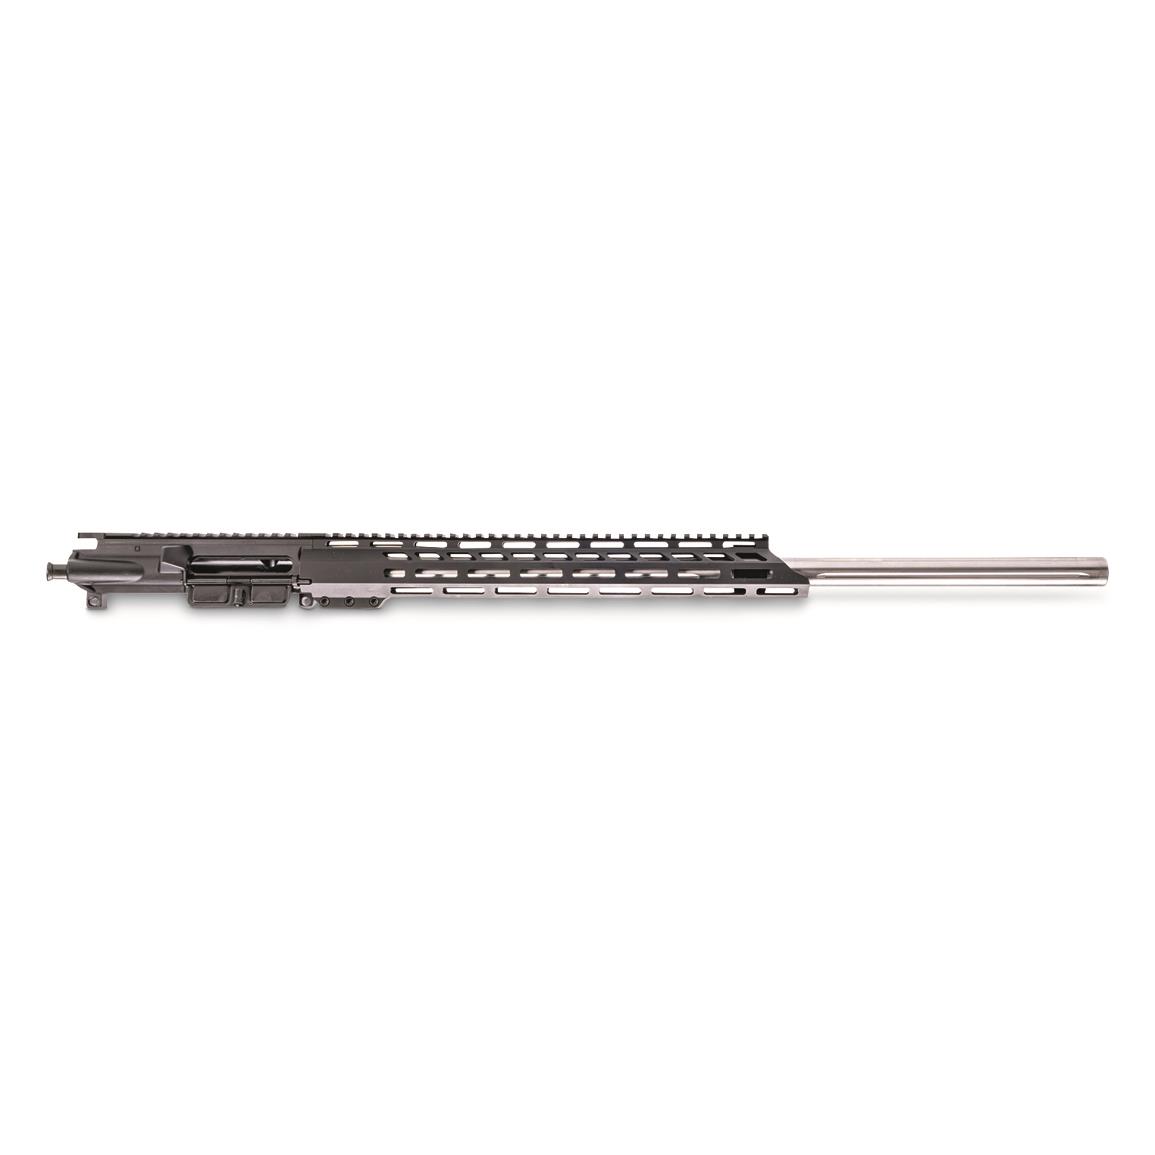 Anderson 5.56/.223 AR-15 Upper Receiver Less BCG/Ch. Handle, 24" Stainless Barrel, M-LOK